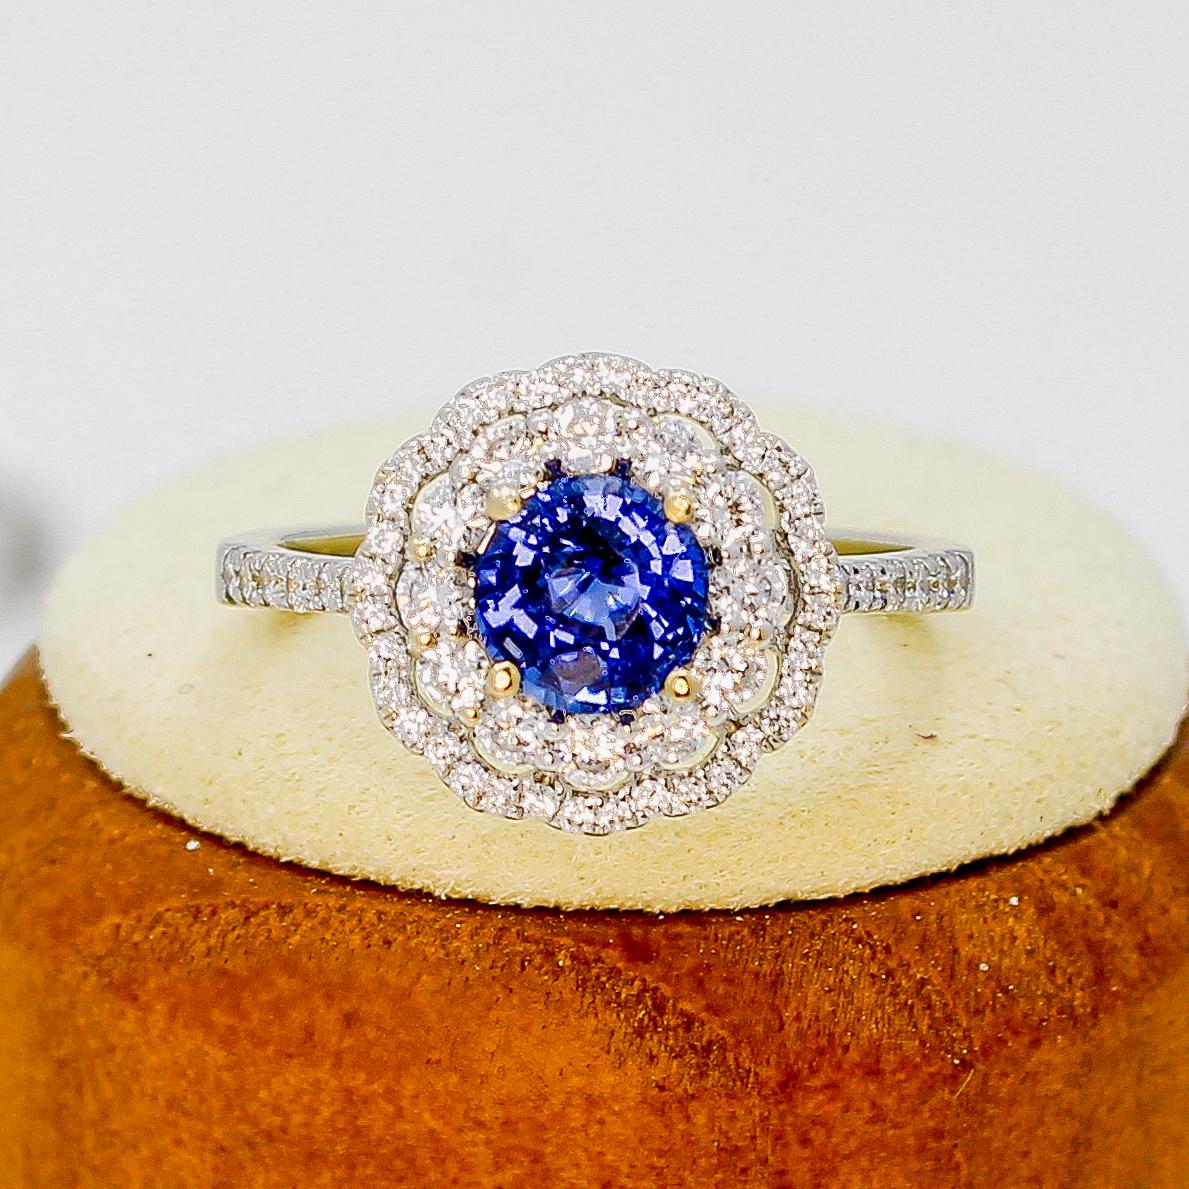 Contemporary GIA Certified 1.02 Carat Cobalt Blue Spinel Ring For Sale